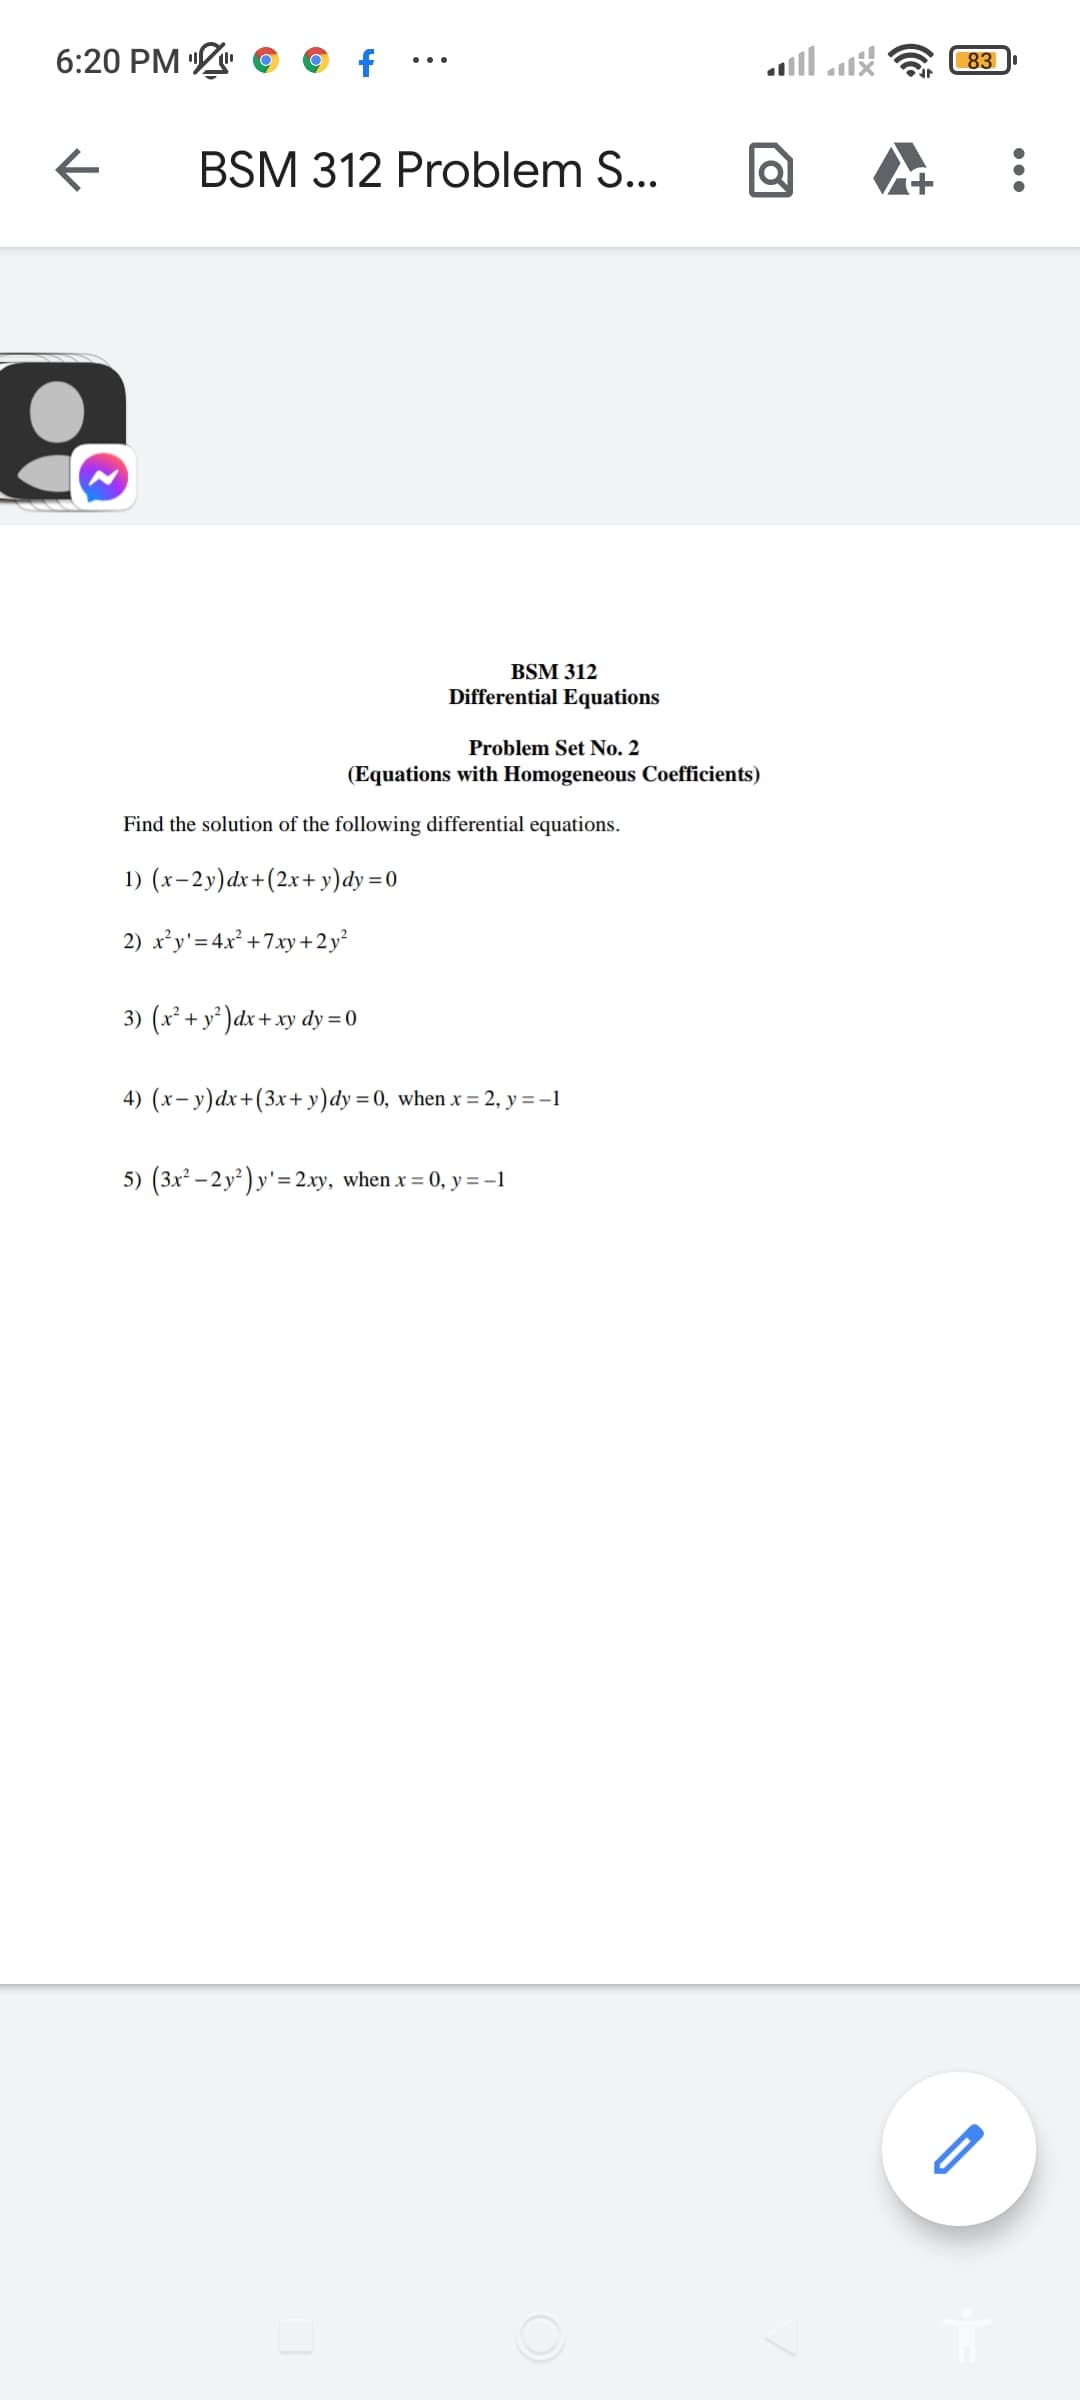 6:20 PM ©
83
BSM 312 Problem S...
BSM 312
Differential Equations
Problem Set No. 2
(Equations with Homogeneous Coefficients)
Find the solution of the following differential equations.
1) (x-2y)dx+(2x+ y)dy =0
2) x’y'= 4x² +7xy +2y²
3) (x² + y° )dx+ xy
dy = 0
4) (x-y)dx+(3x+ y)dy =0, when x = 2, y = -1
5) (3x² – 2 y² ) y'= 2xy, when x = 0, y =-1
